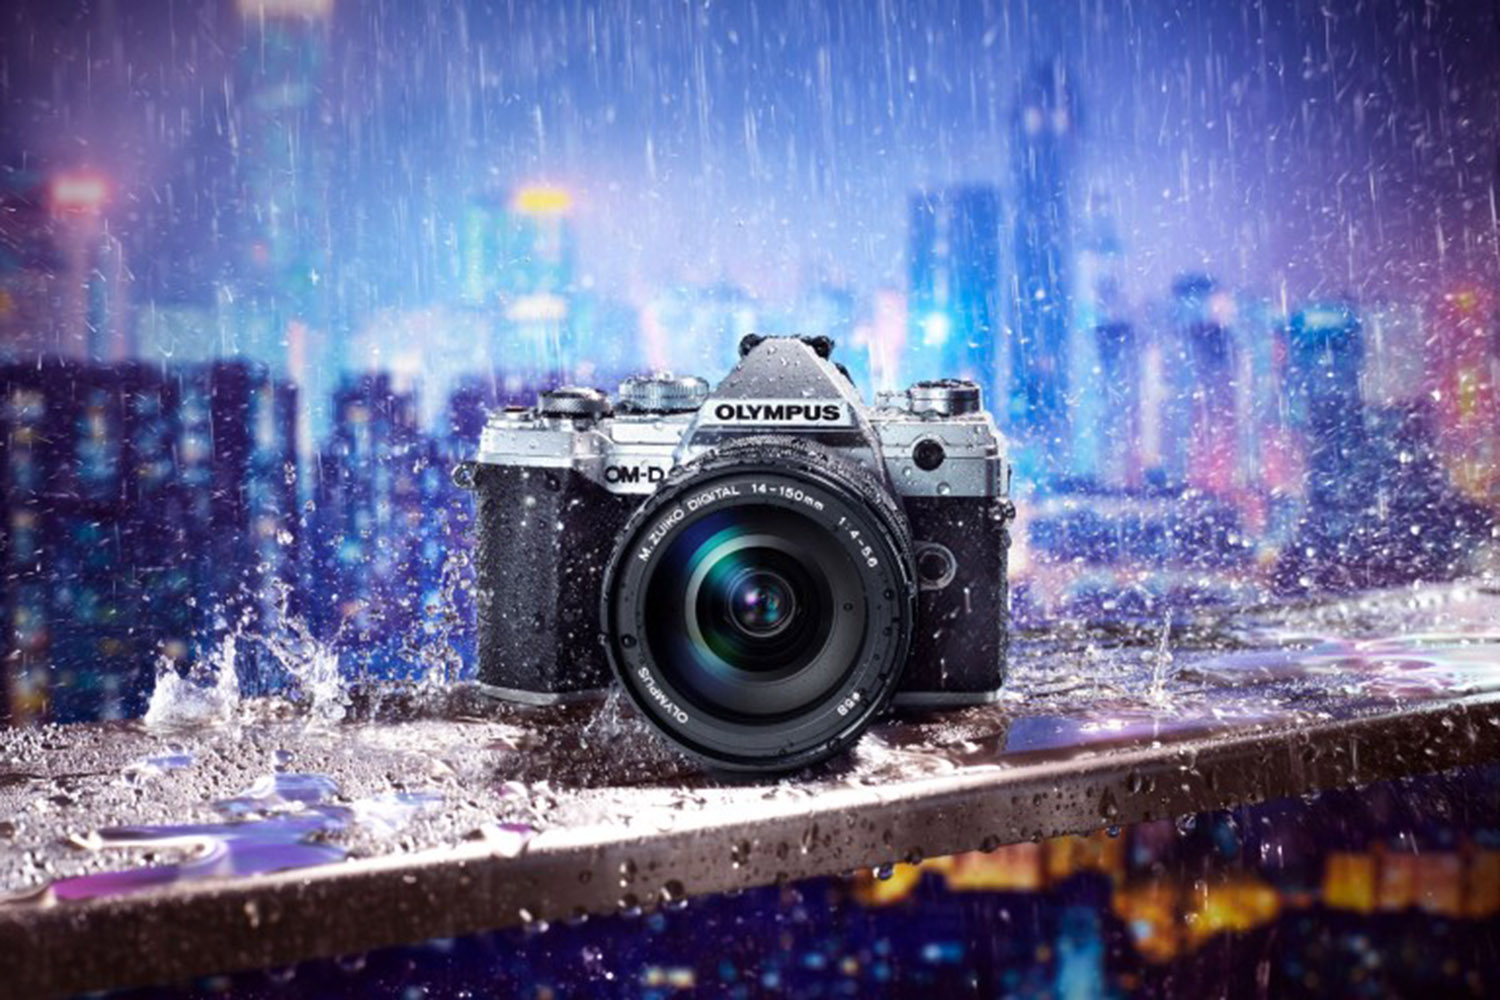 Best camera for portrait photography Olympus OM-D E-M5 Mark III